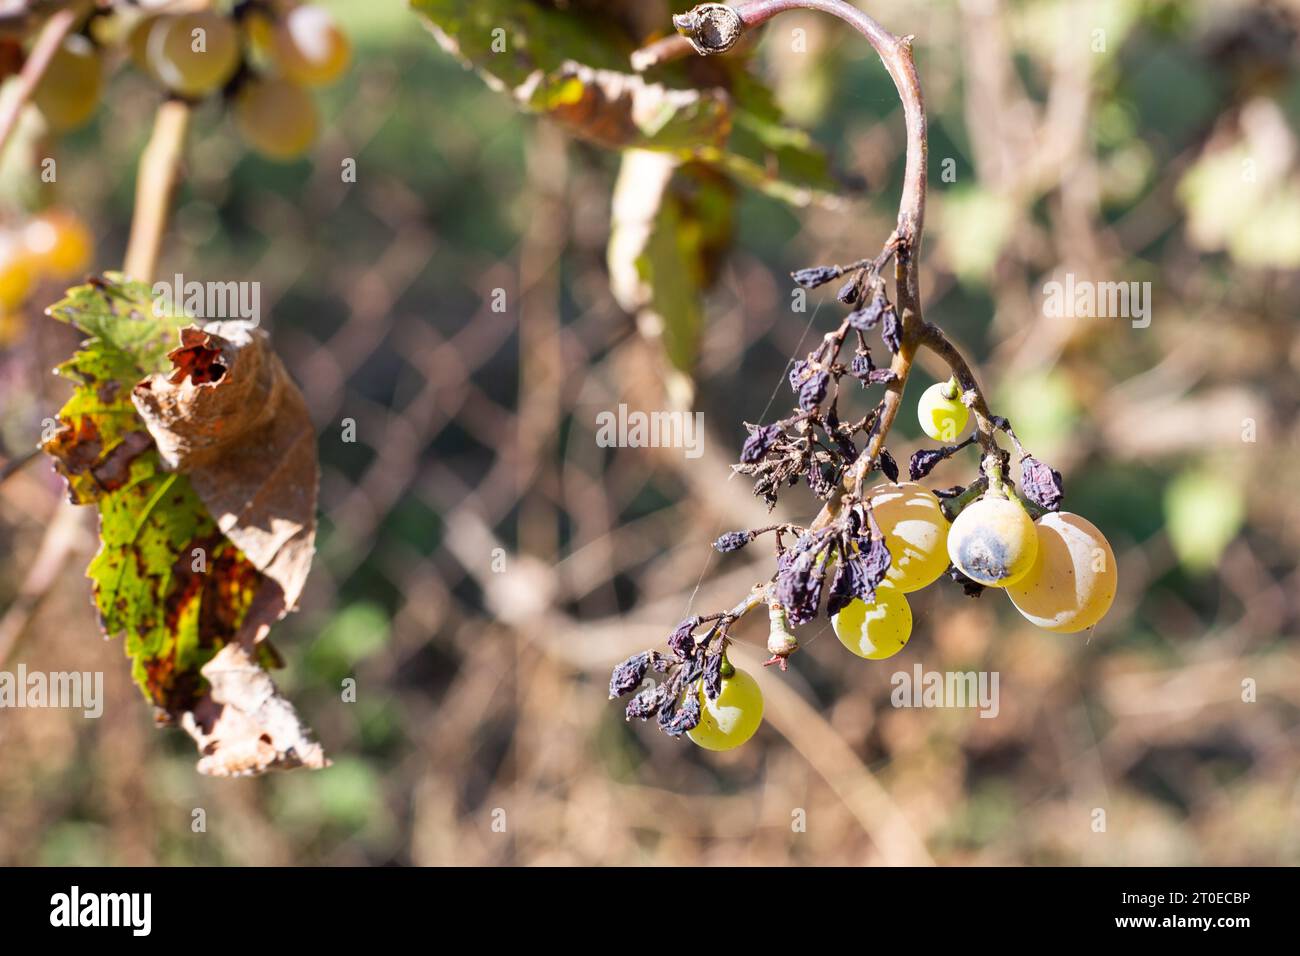 sick dried grapes. Bunches of green grapes with dried fruits on the vine. Stock Photo